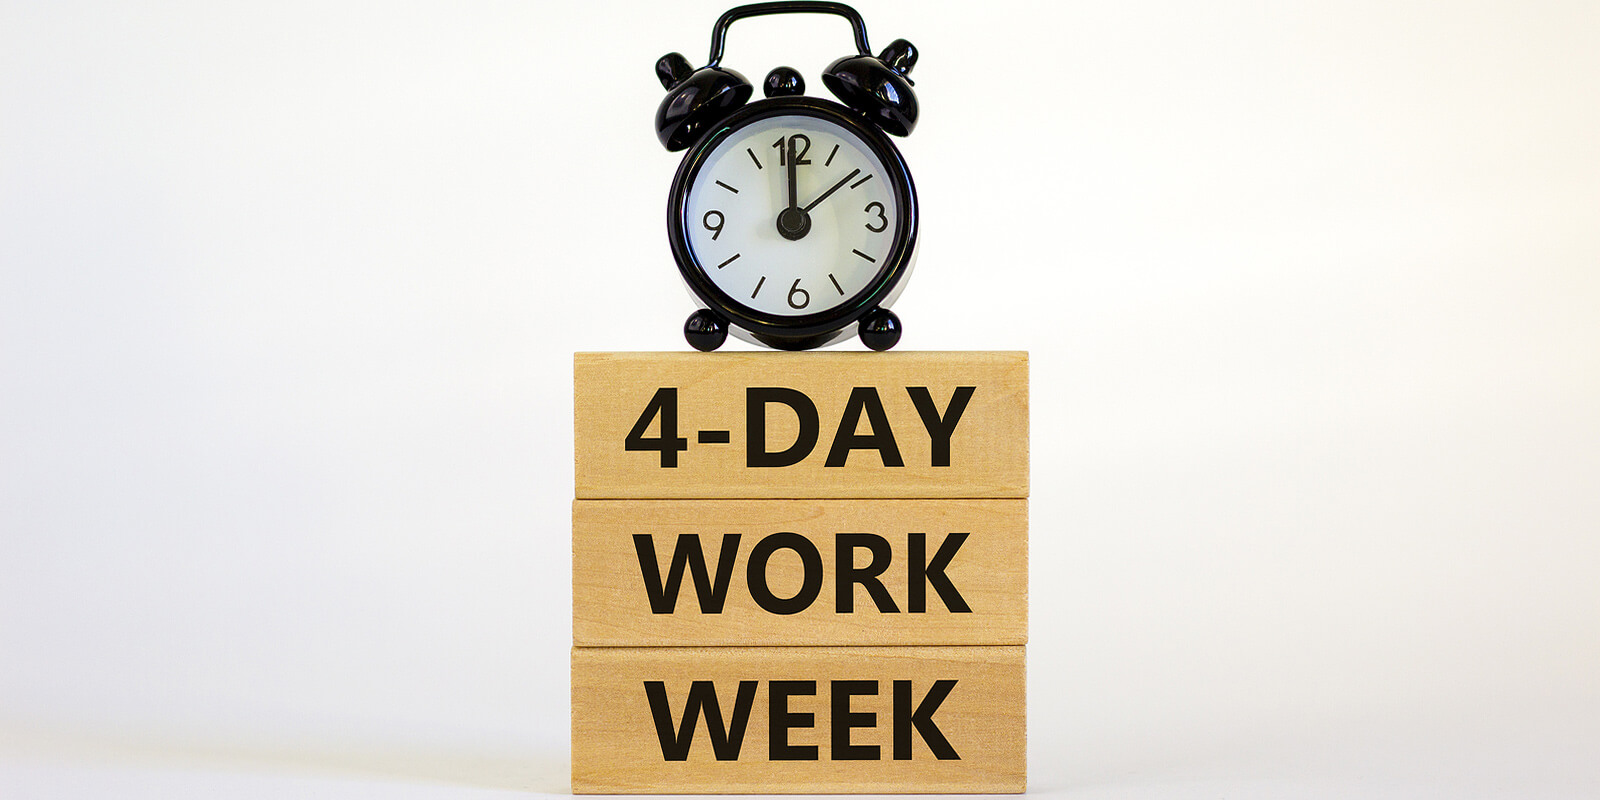 The 4 day work week is not the future